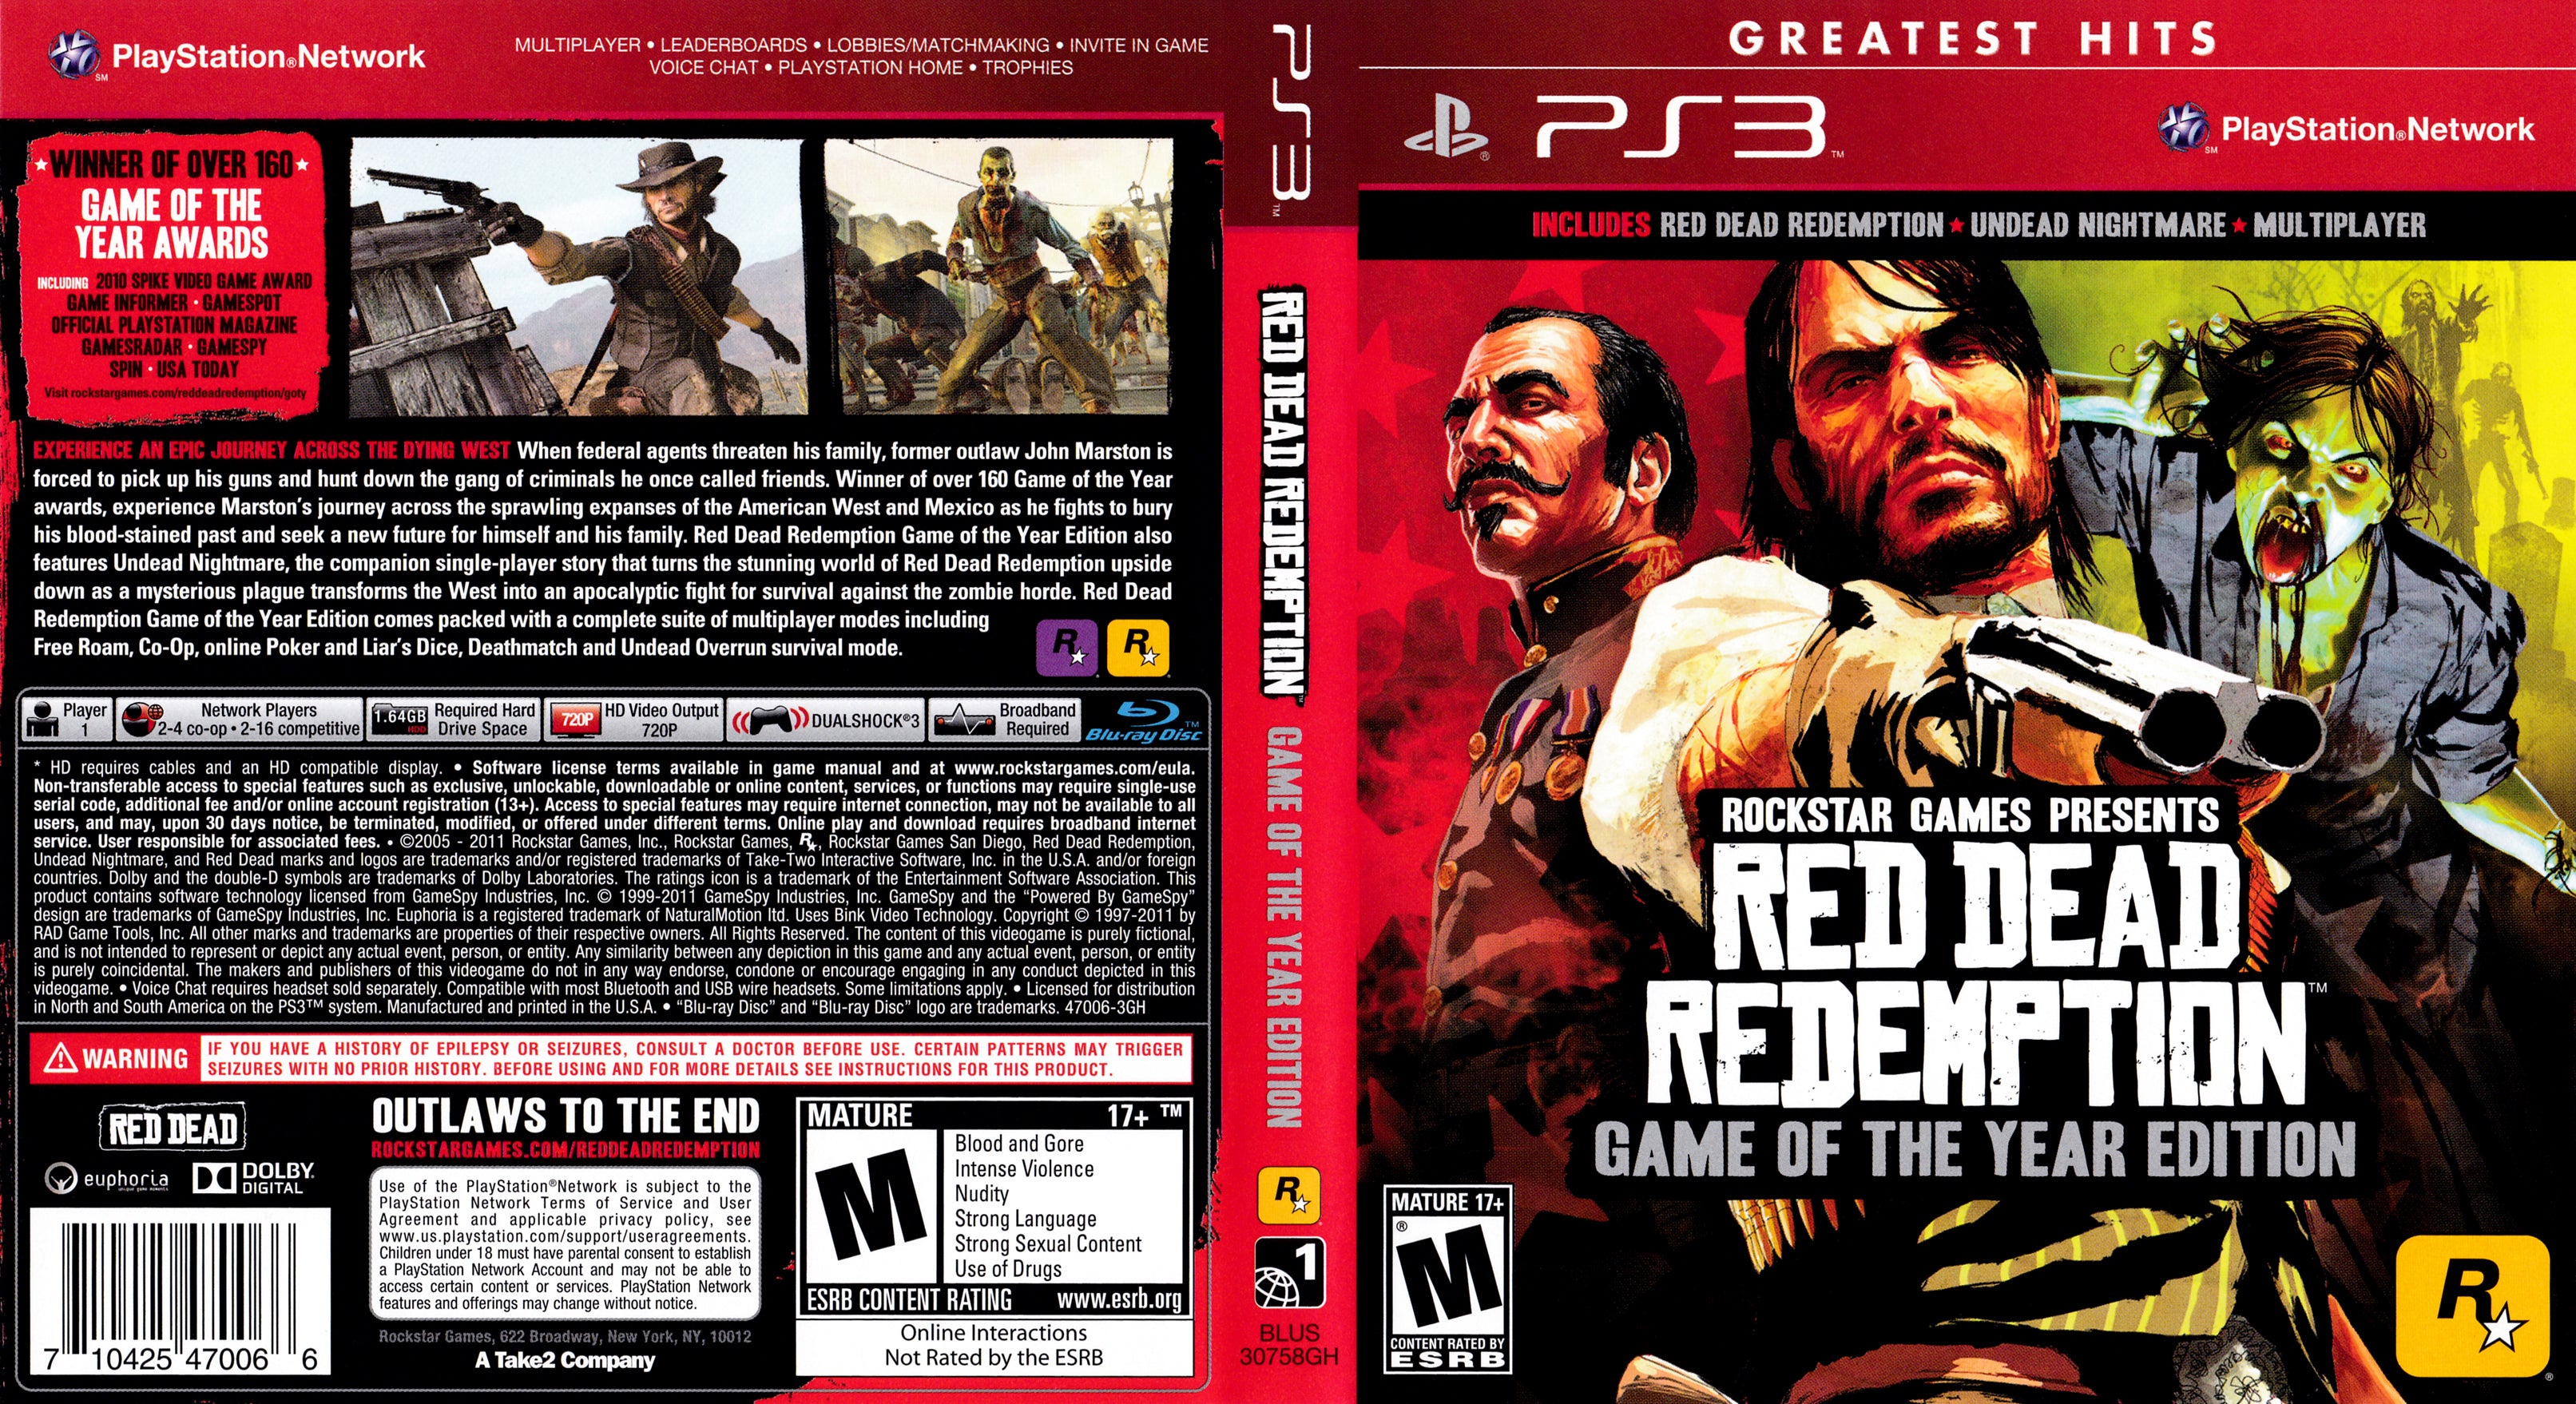 Red Dead Redemption Game of the Year Edition, Rockstar Games, PlayStation 3,  710425470066 